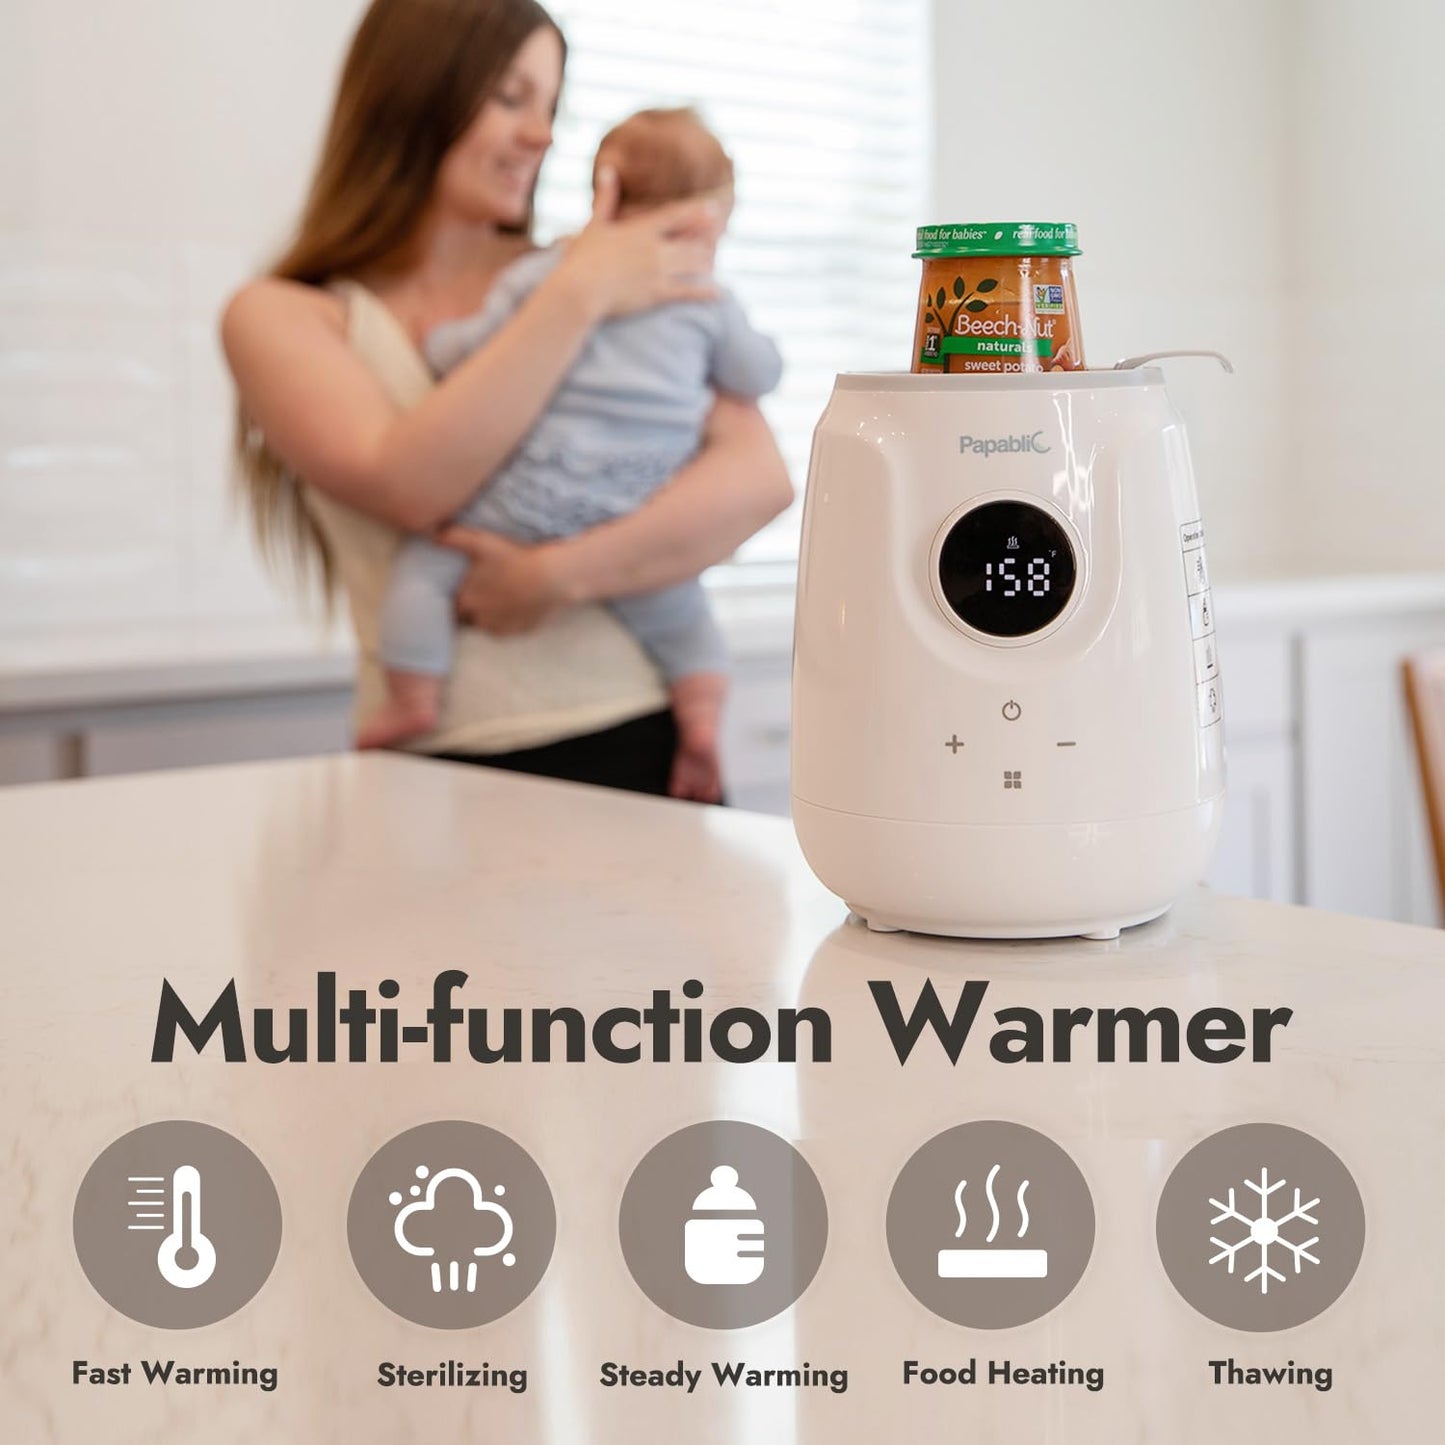 Papablic Ultra-Fast Bottle Warmer, Ready Milk in 2 Min, Baby Bottle Warmer for Breastmilk and Formula, Accurate Temperature Control and Automatic Shut-Off, Bottle Warmers for All Bottles